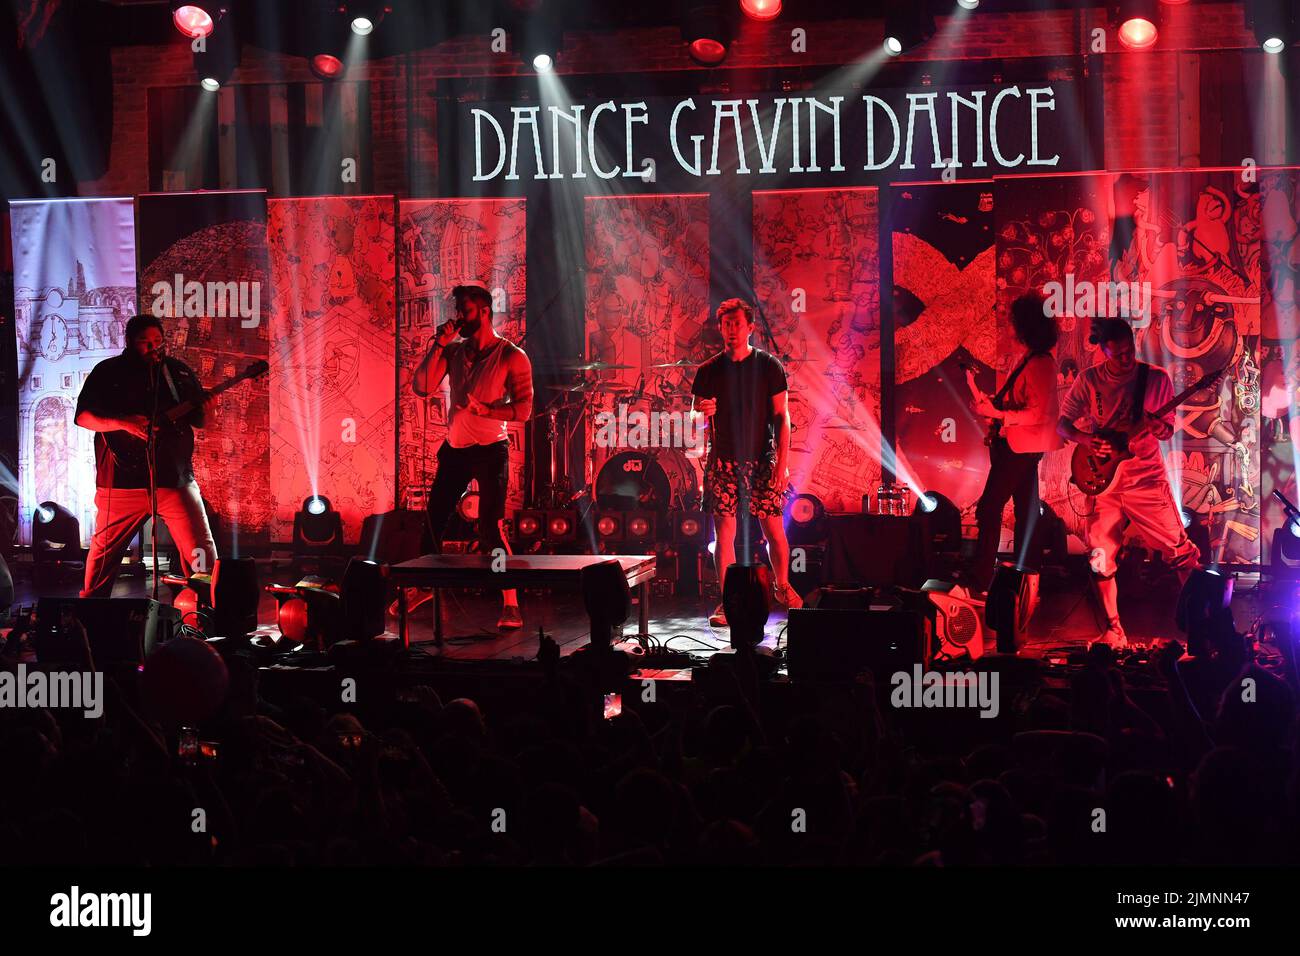 FORT LAUDERDALE FL - AUGUST 05: Dance Gavin Dance performs at Revolution Live on August 5, 2022 in Fort Lauderdale, Florida Credit: mpi04/MediaPunch Stock Photo